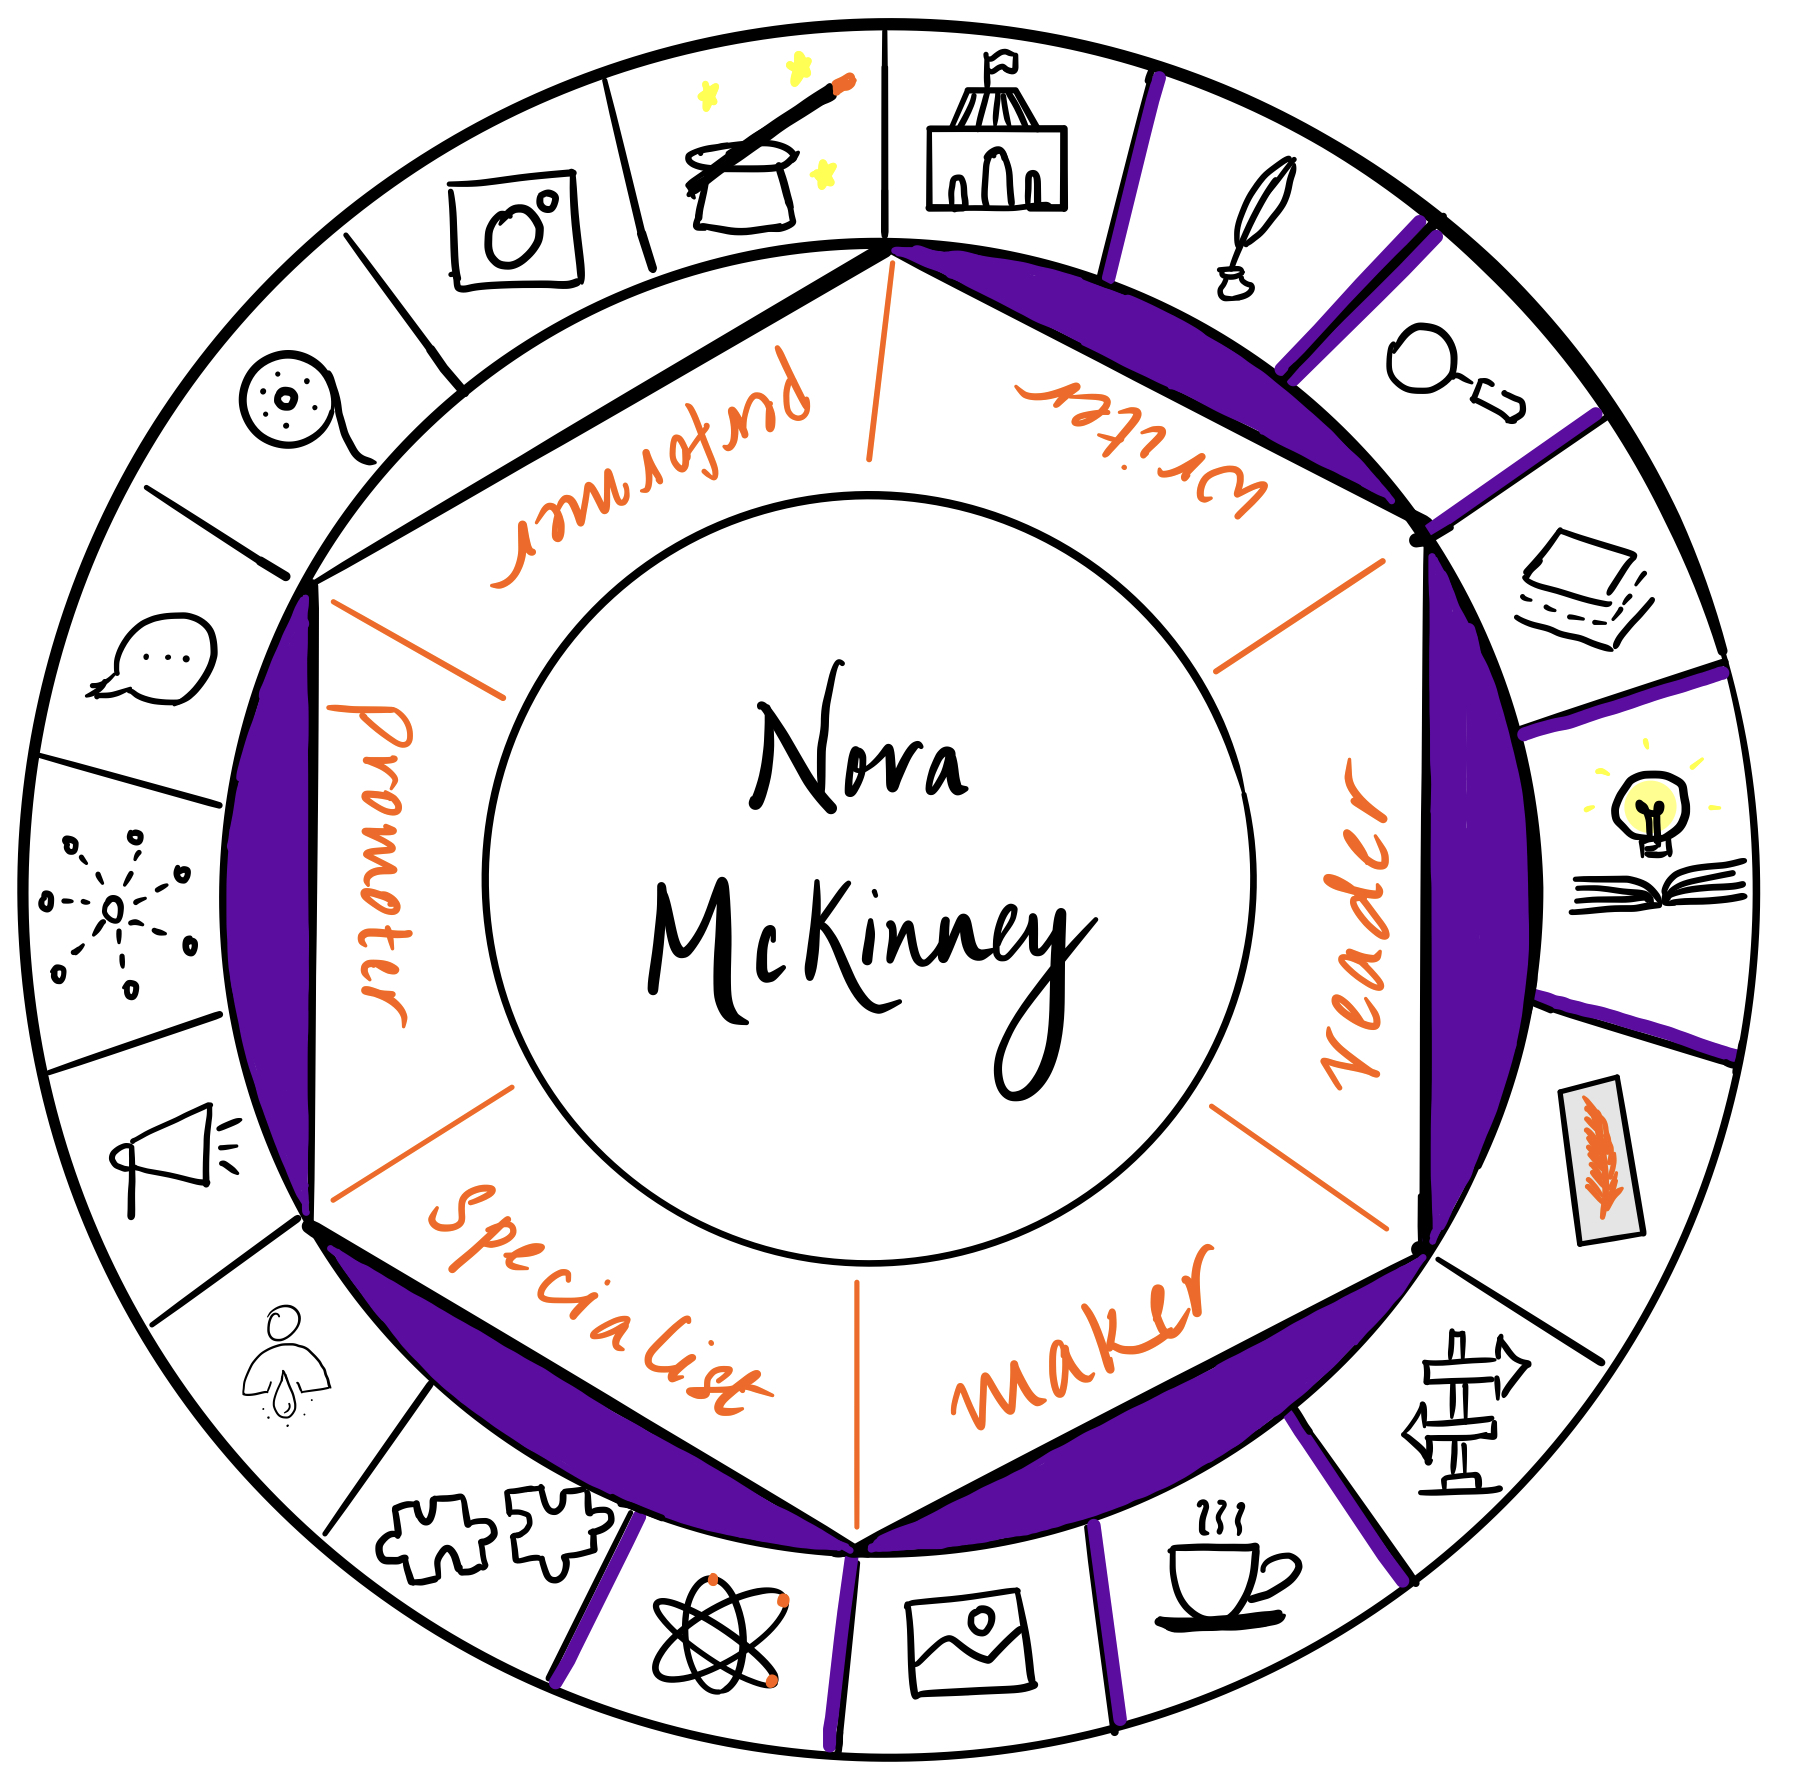 Nora McKinney is a writer, reader, specialist, promoter and maker. It's a pleasure to have her over on The Creator's Roulette to talk about the academic and writing communities as well as publishing.